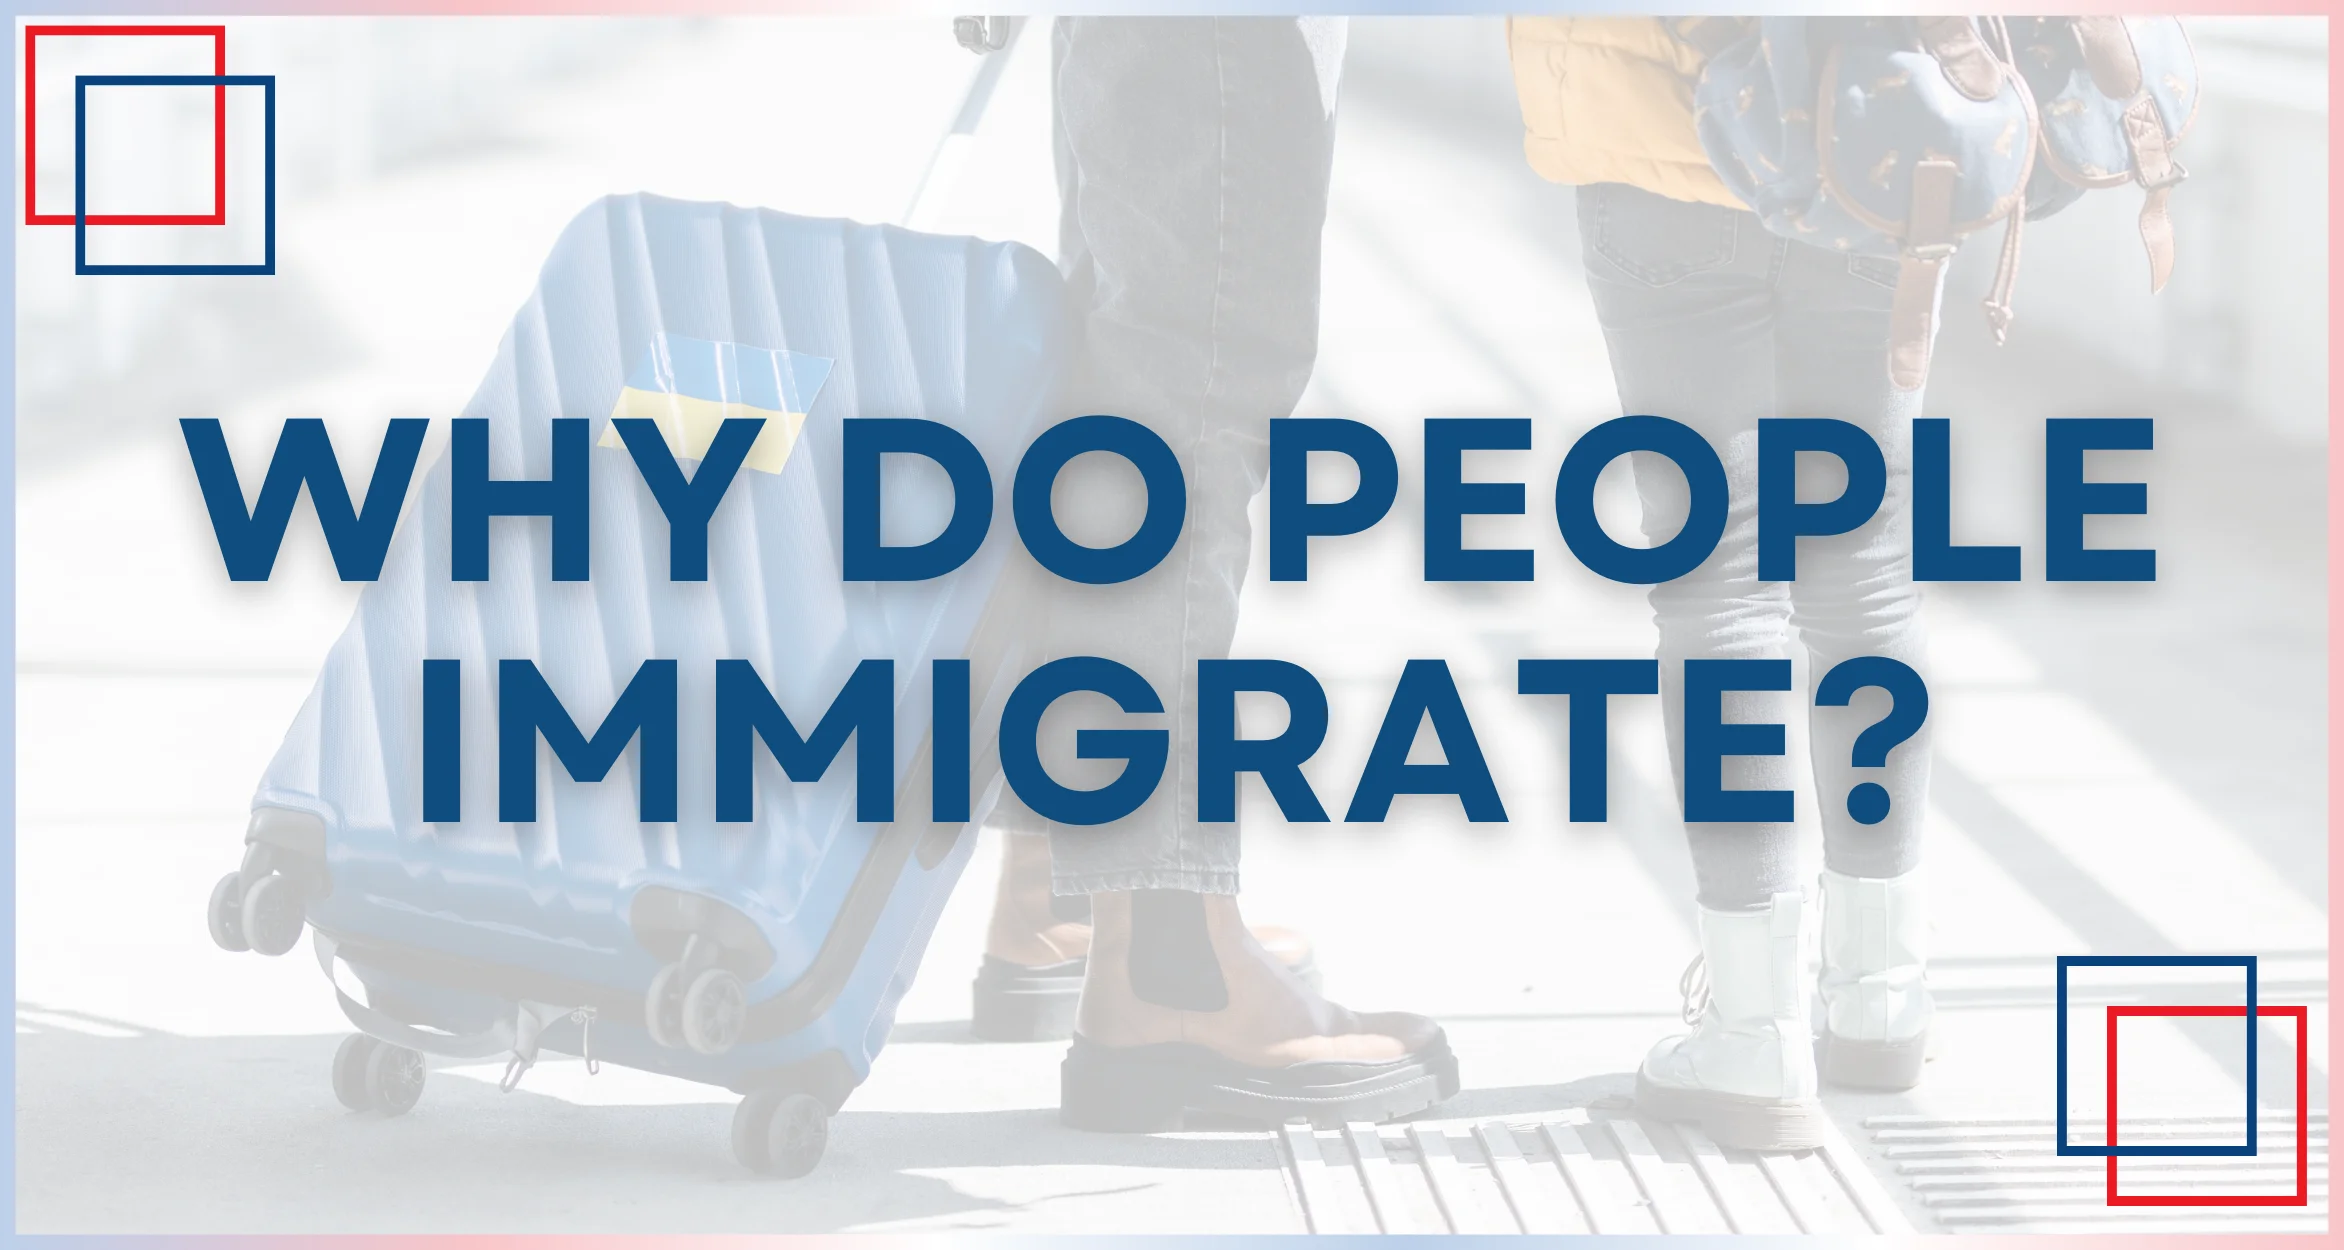 Why do people immigrate?